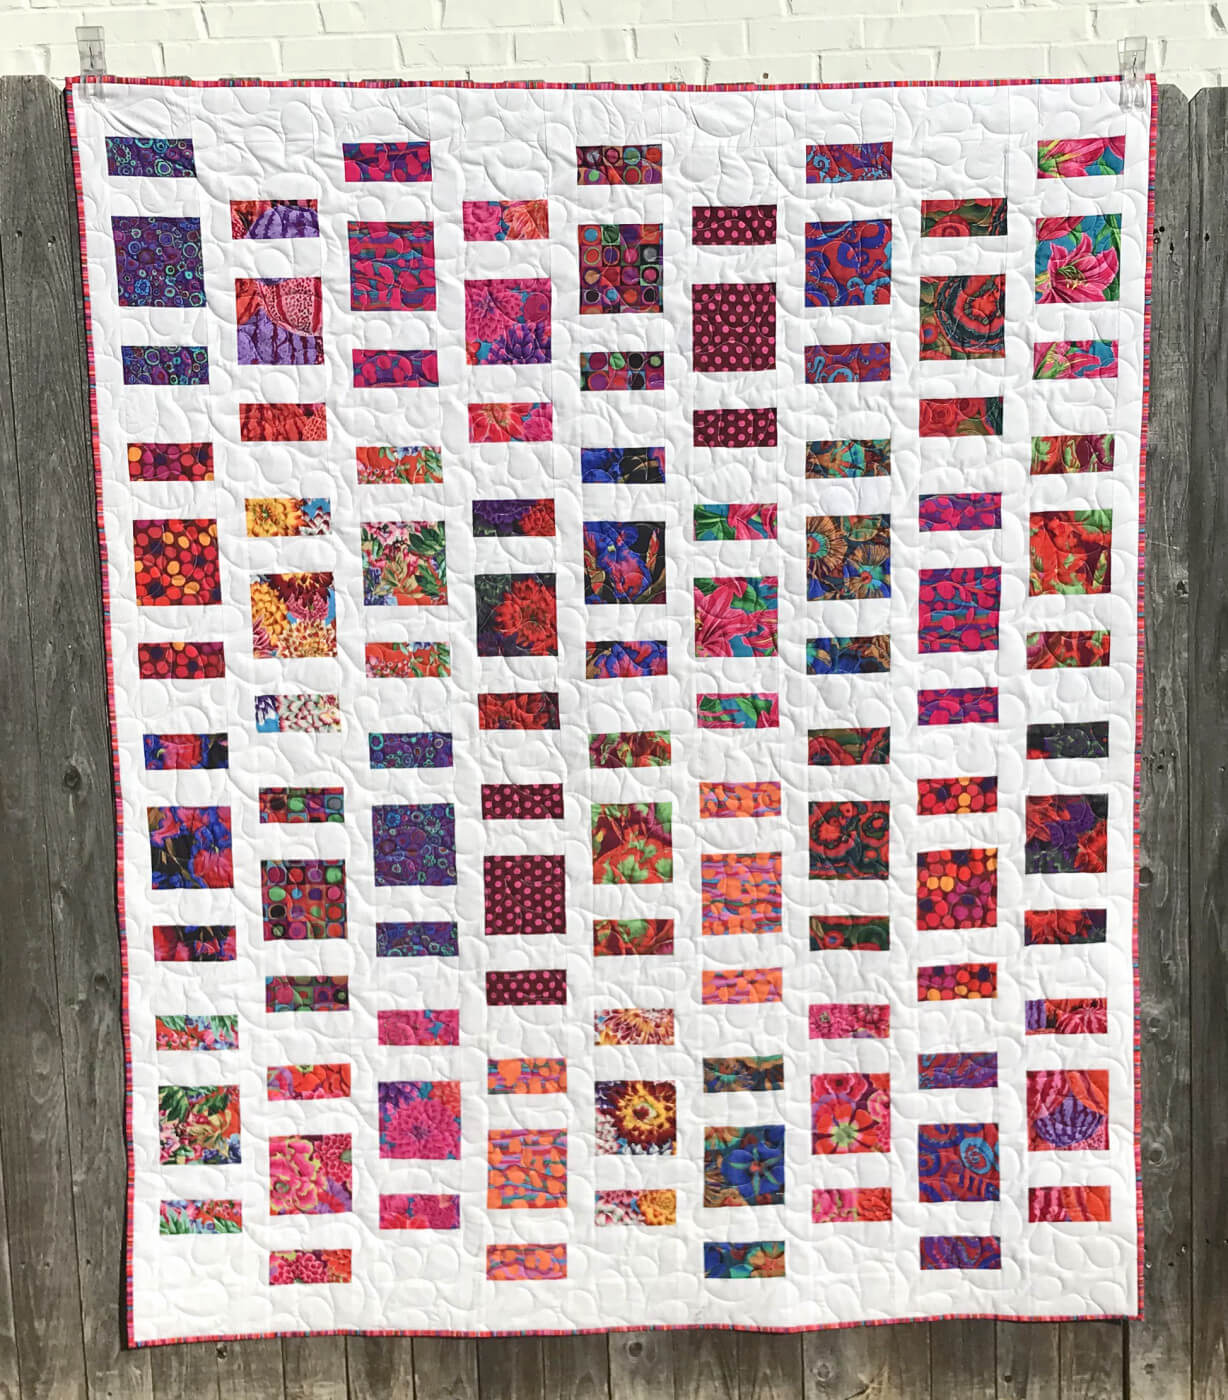 How to Resize a Quilt Pattern